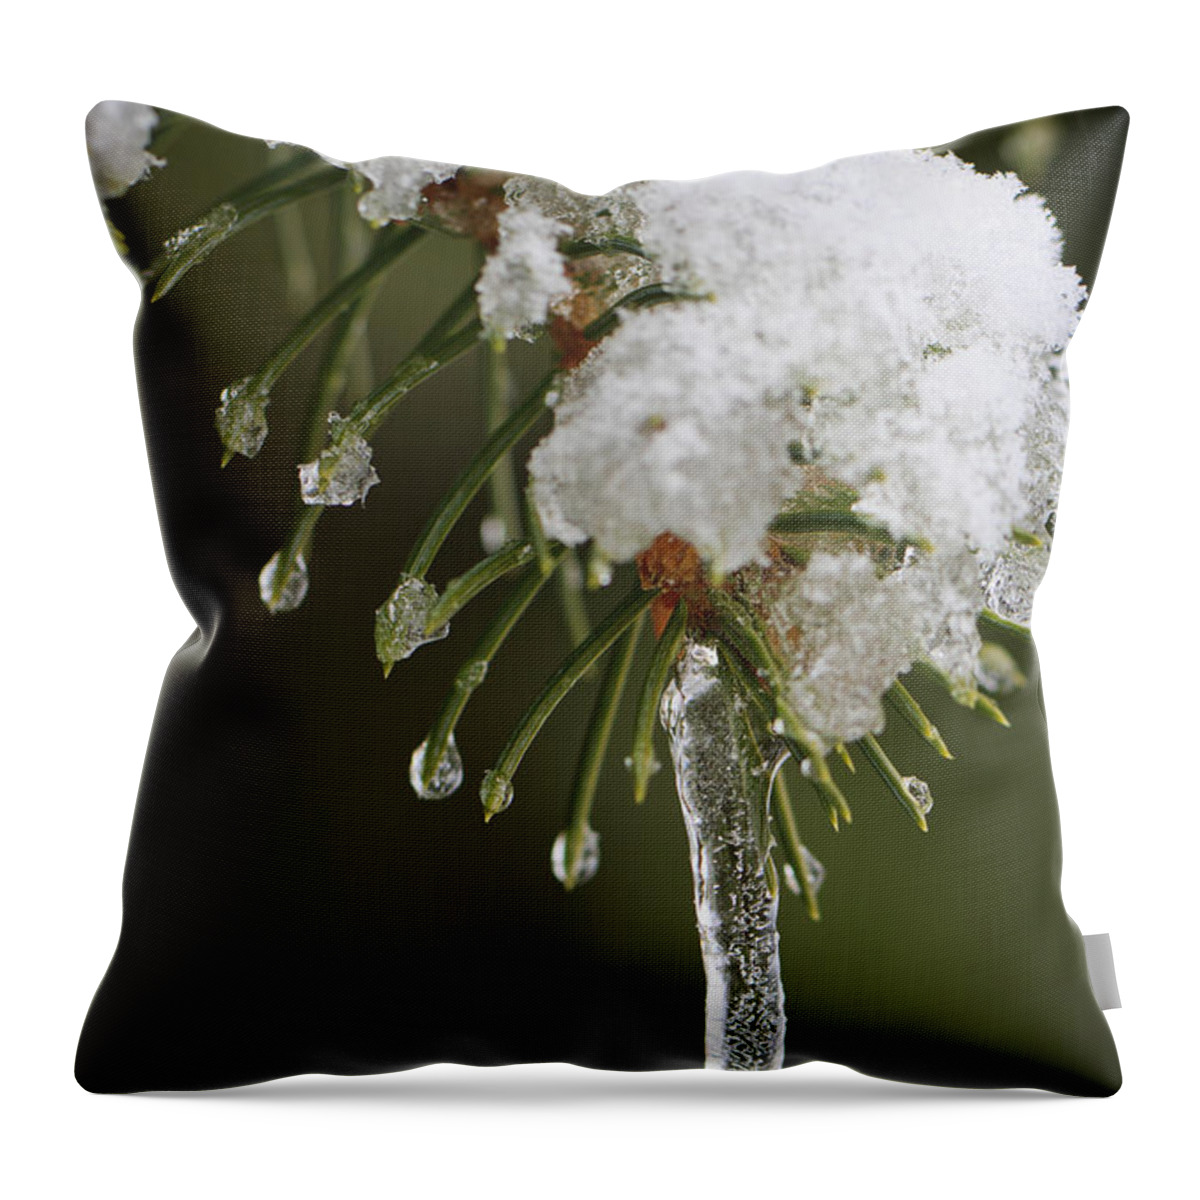 3scape Photos Throw Pillow featuring the photograph The Last Snow by Adam Romanowicz